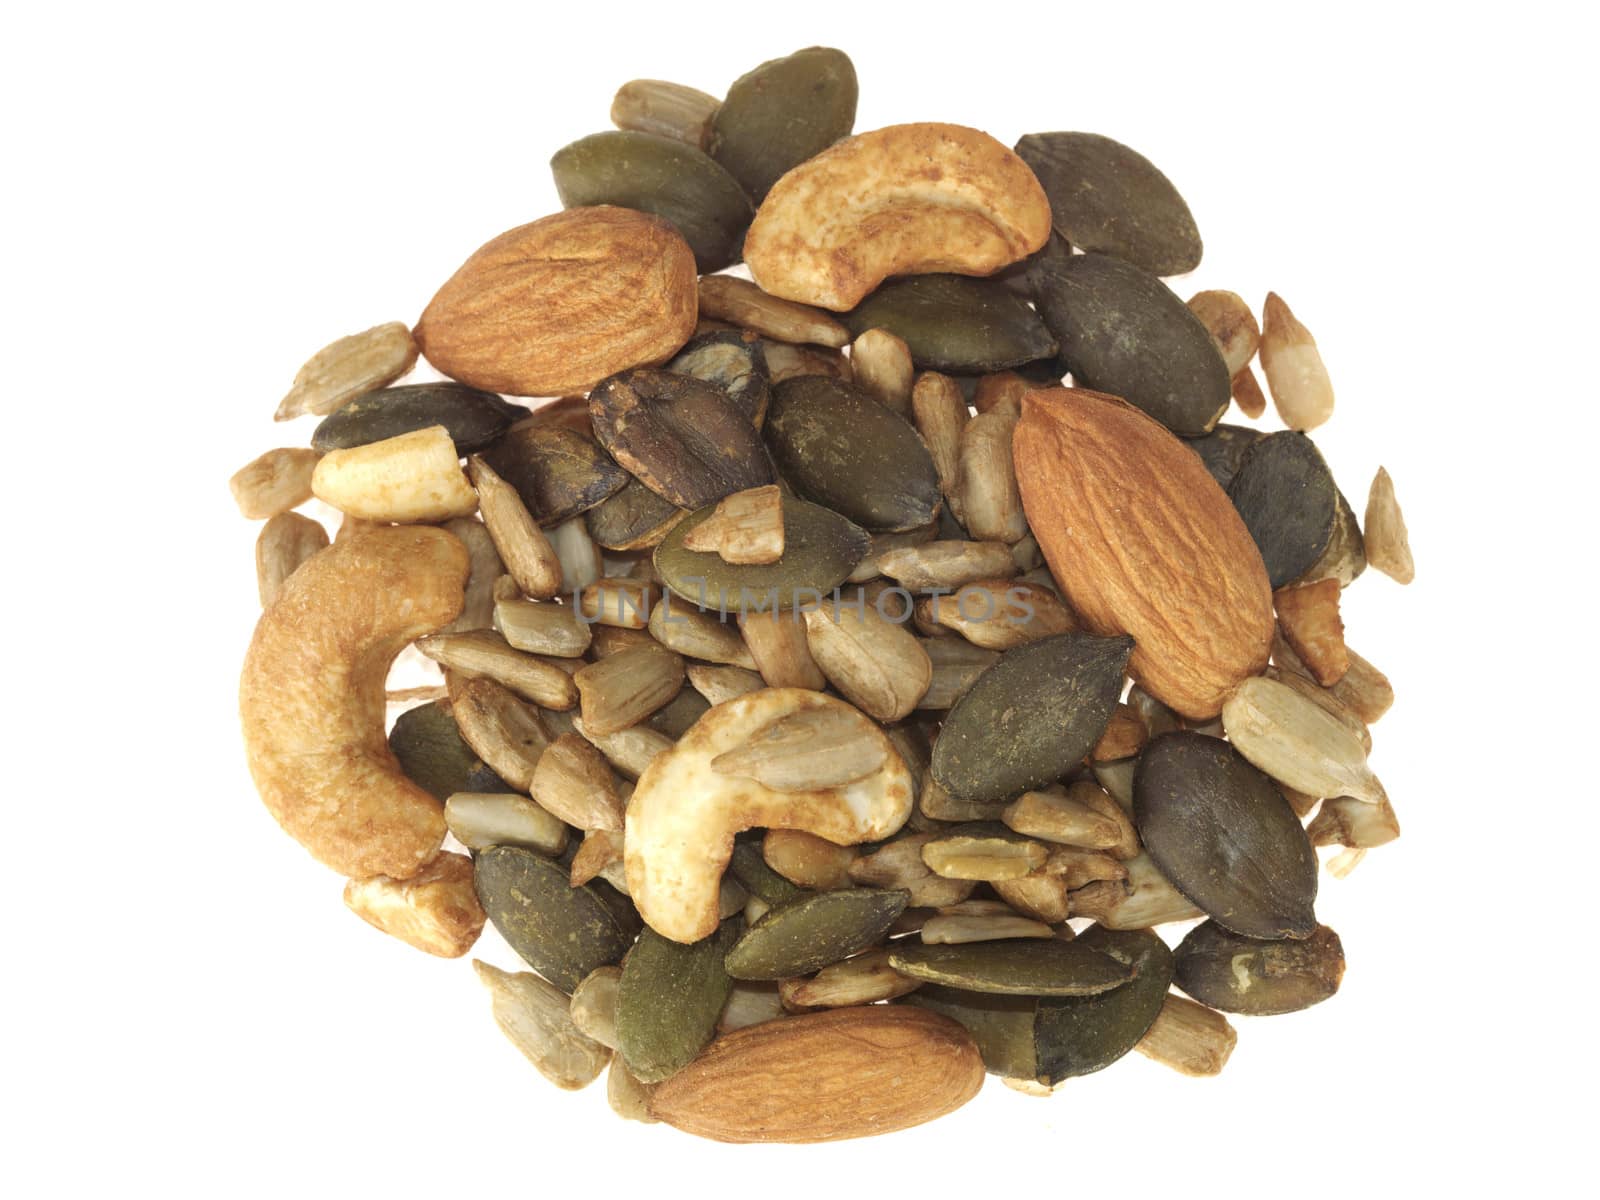 Seed and Nut Mix by Whiteboxmedia